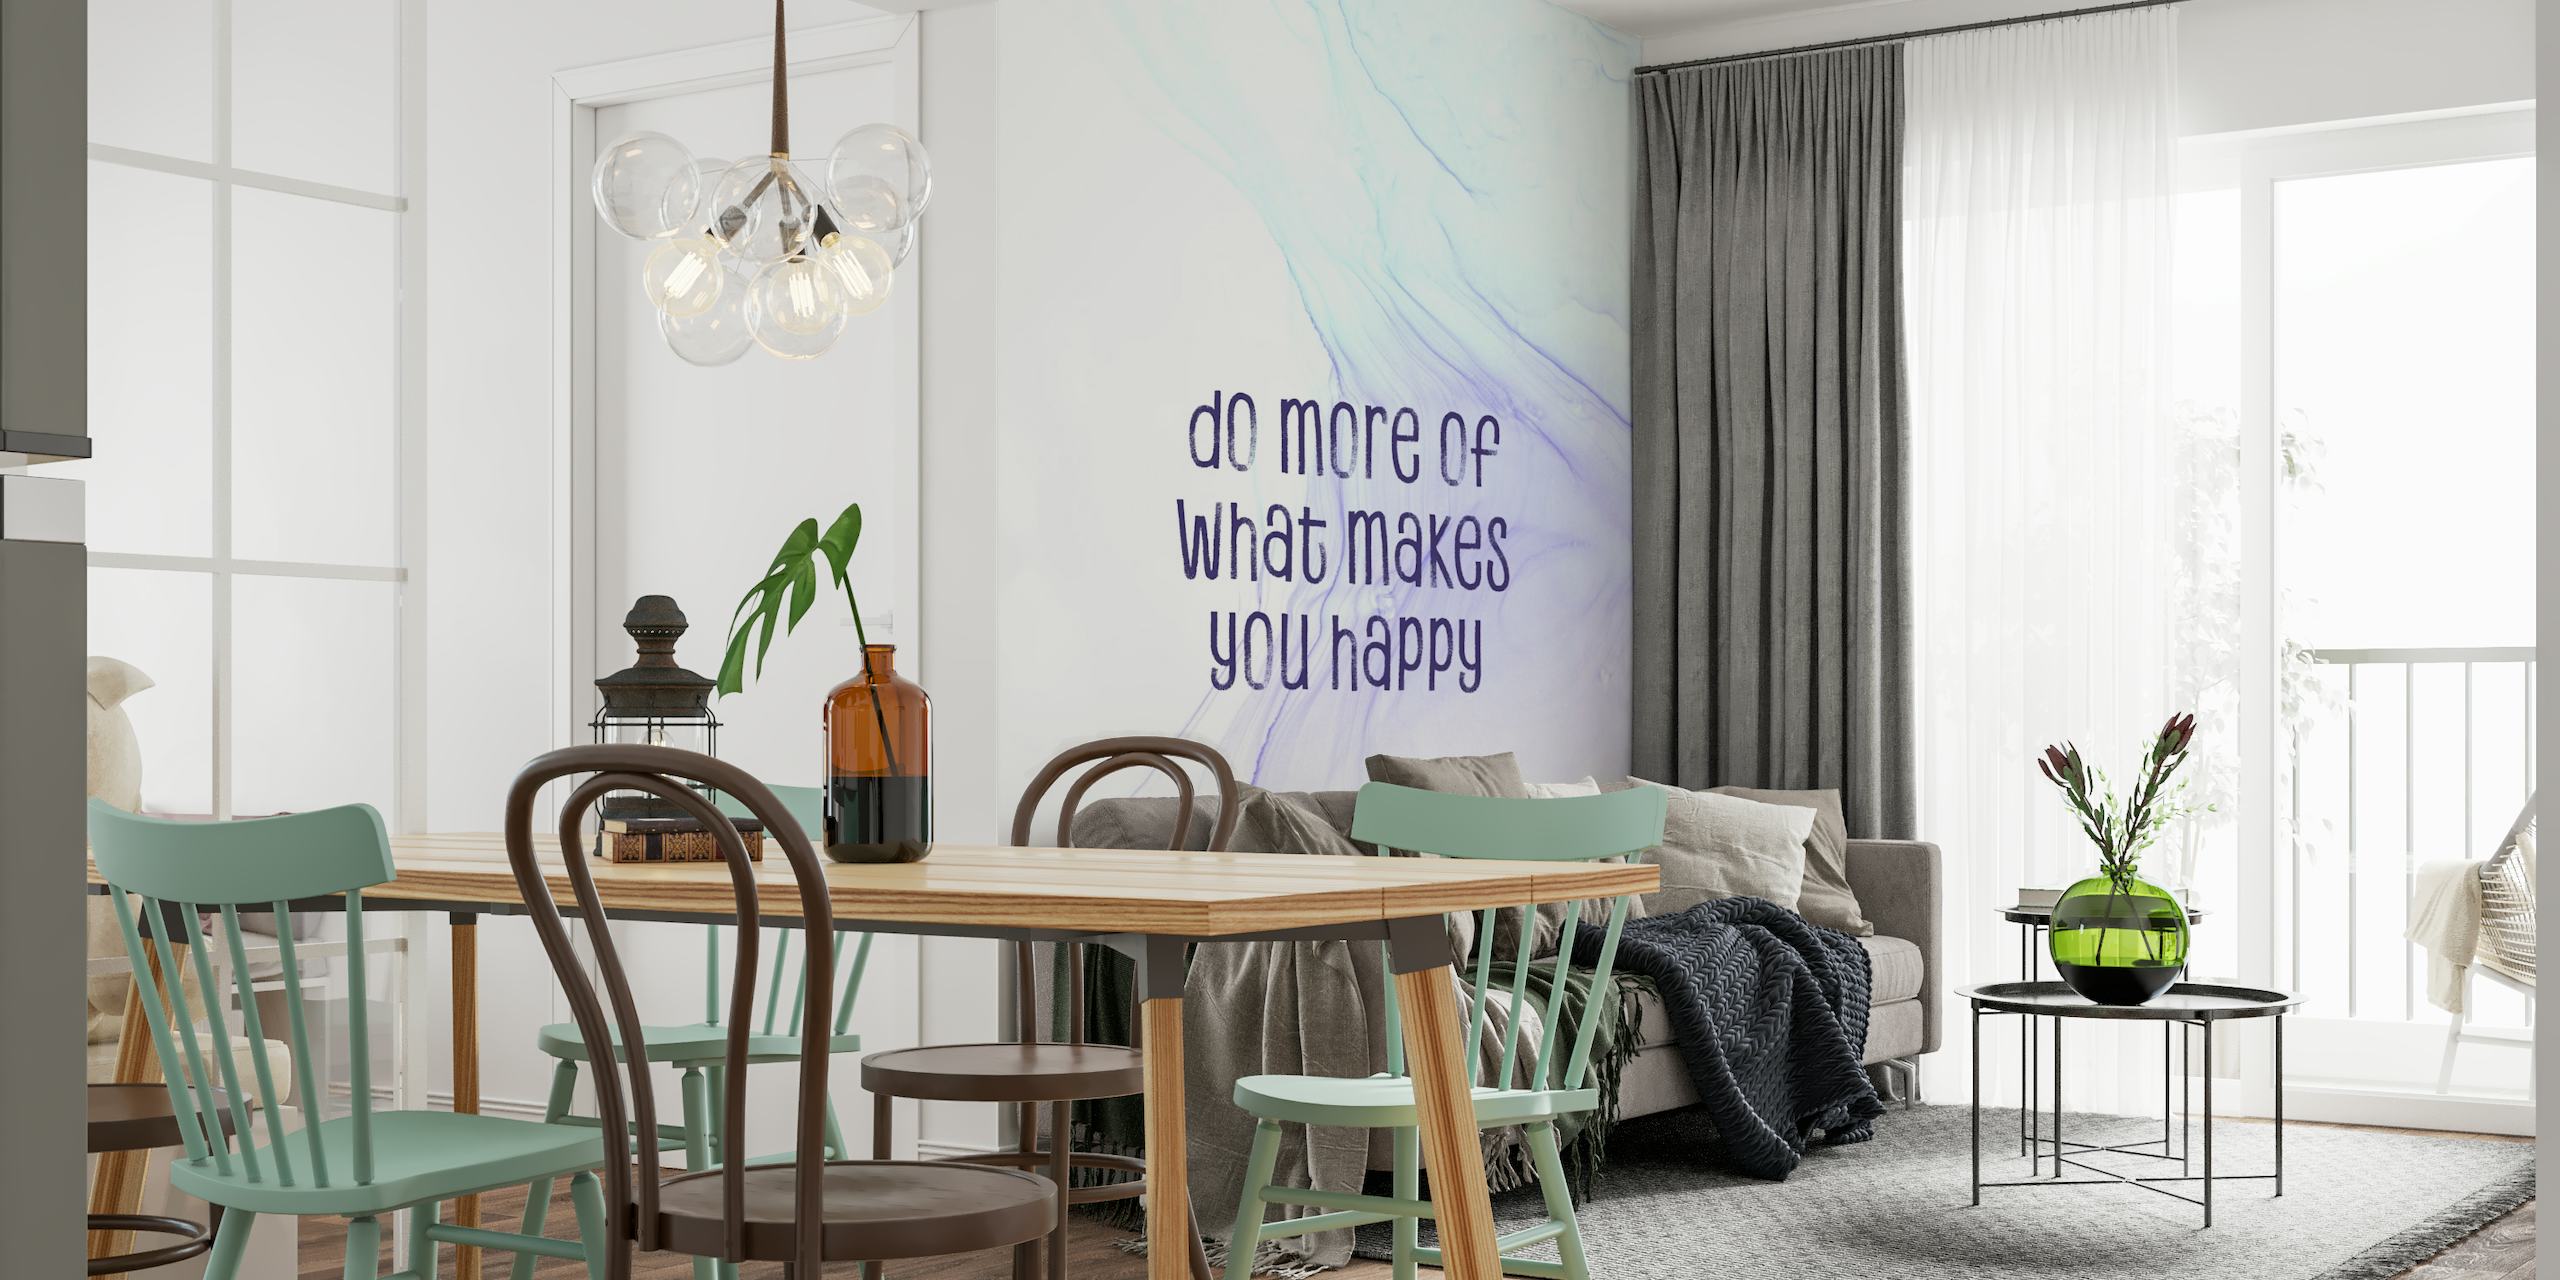 Happywall's vibrant and unique Home Wallpaper